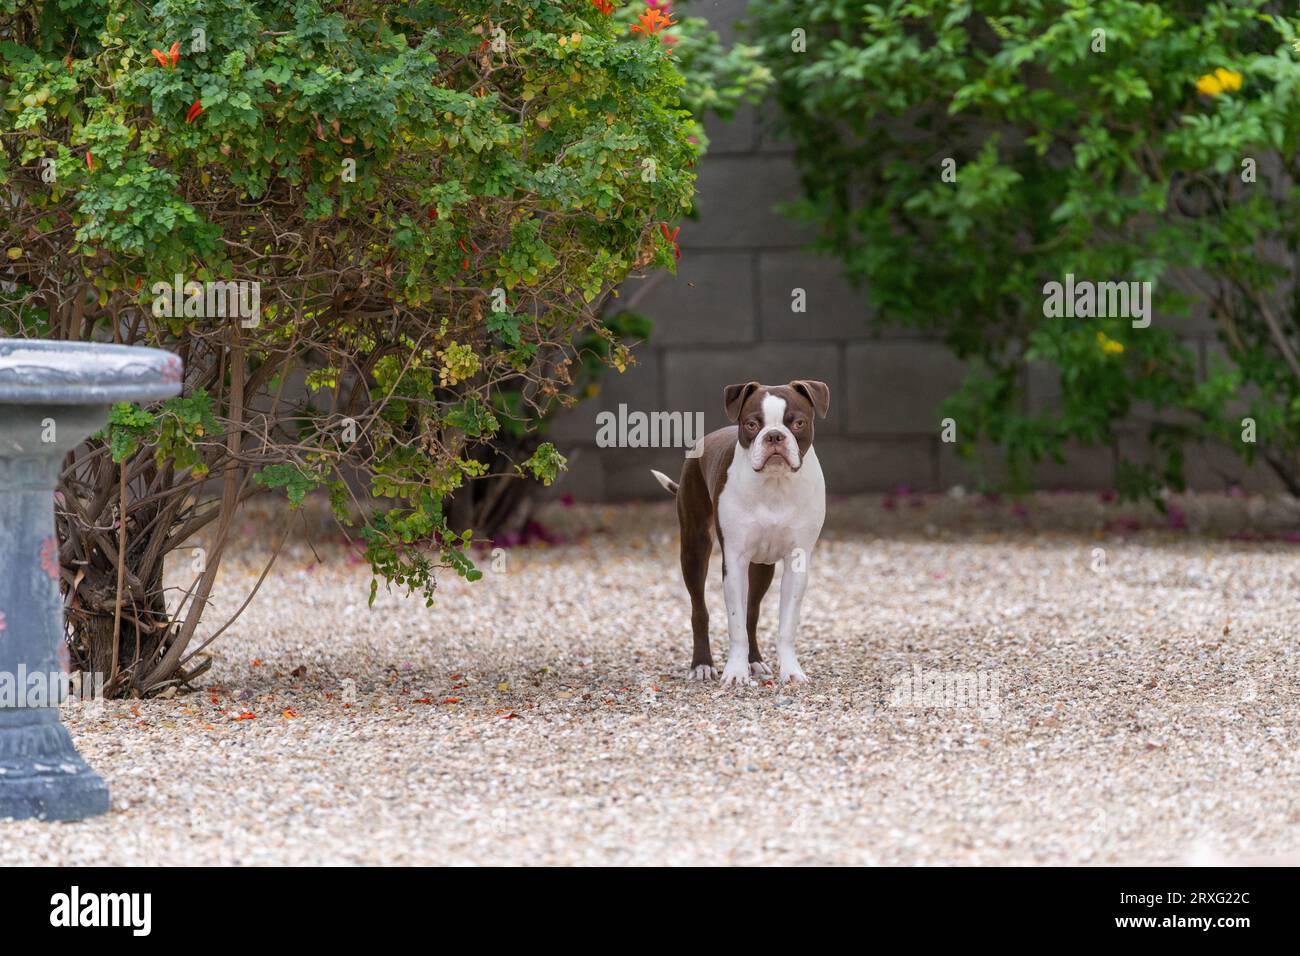 Boston terrier in a yard posing for a portrait between two bushes Stock Photo